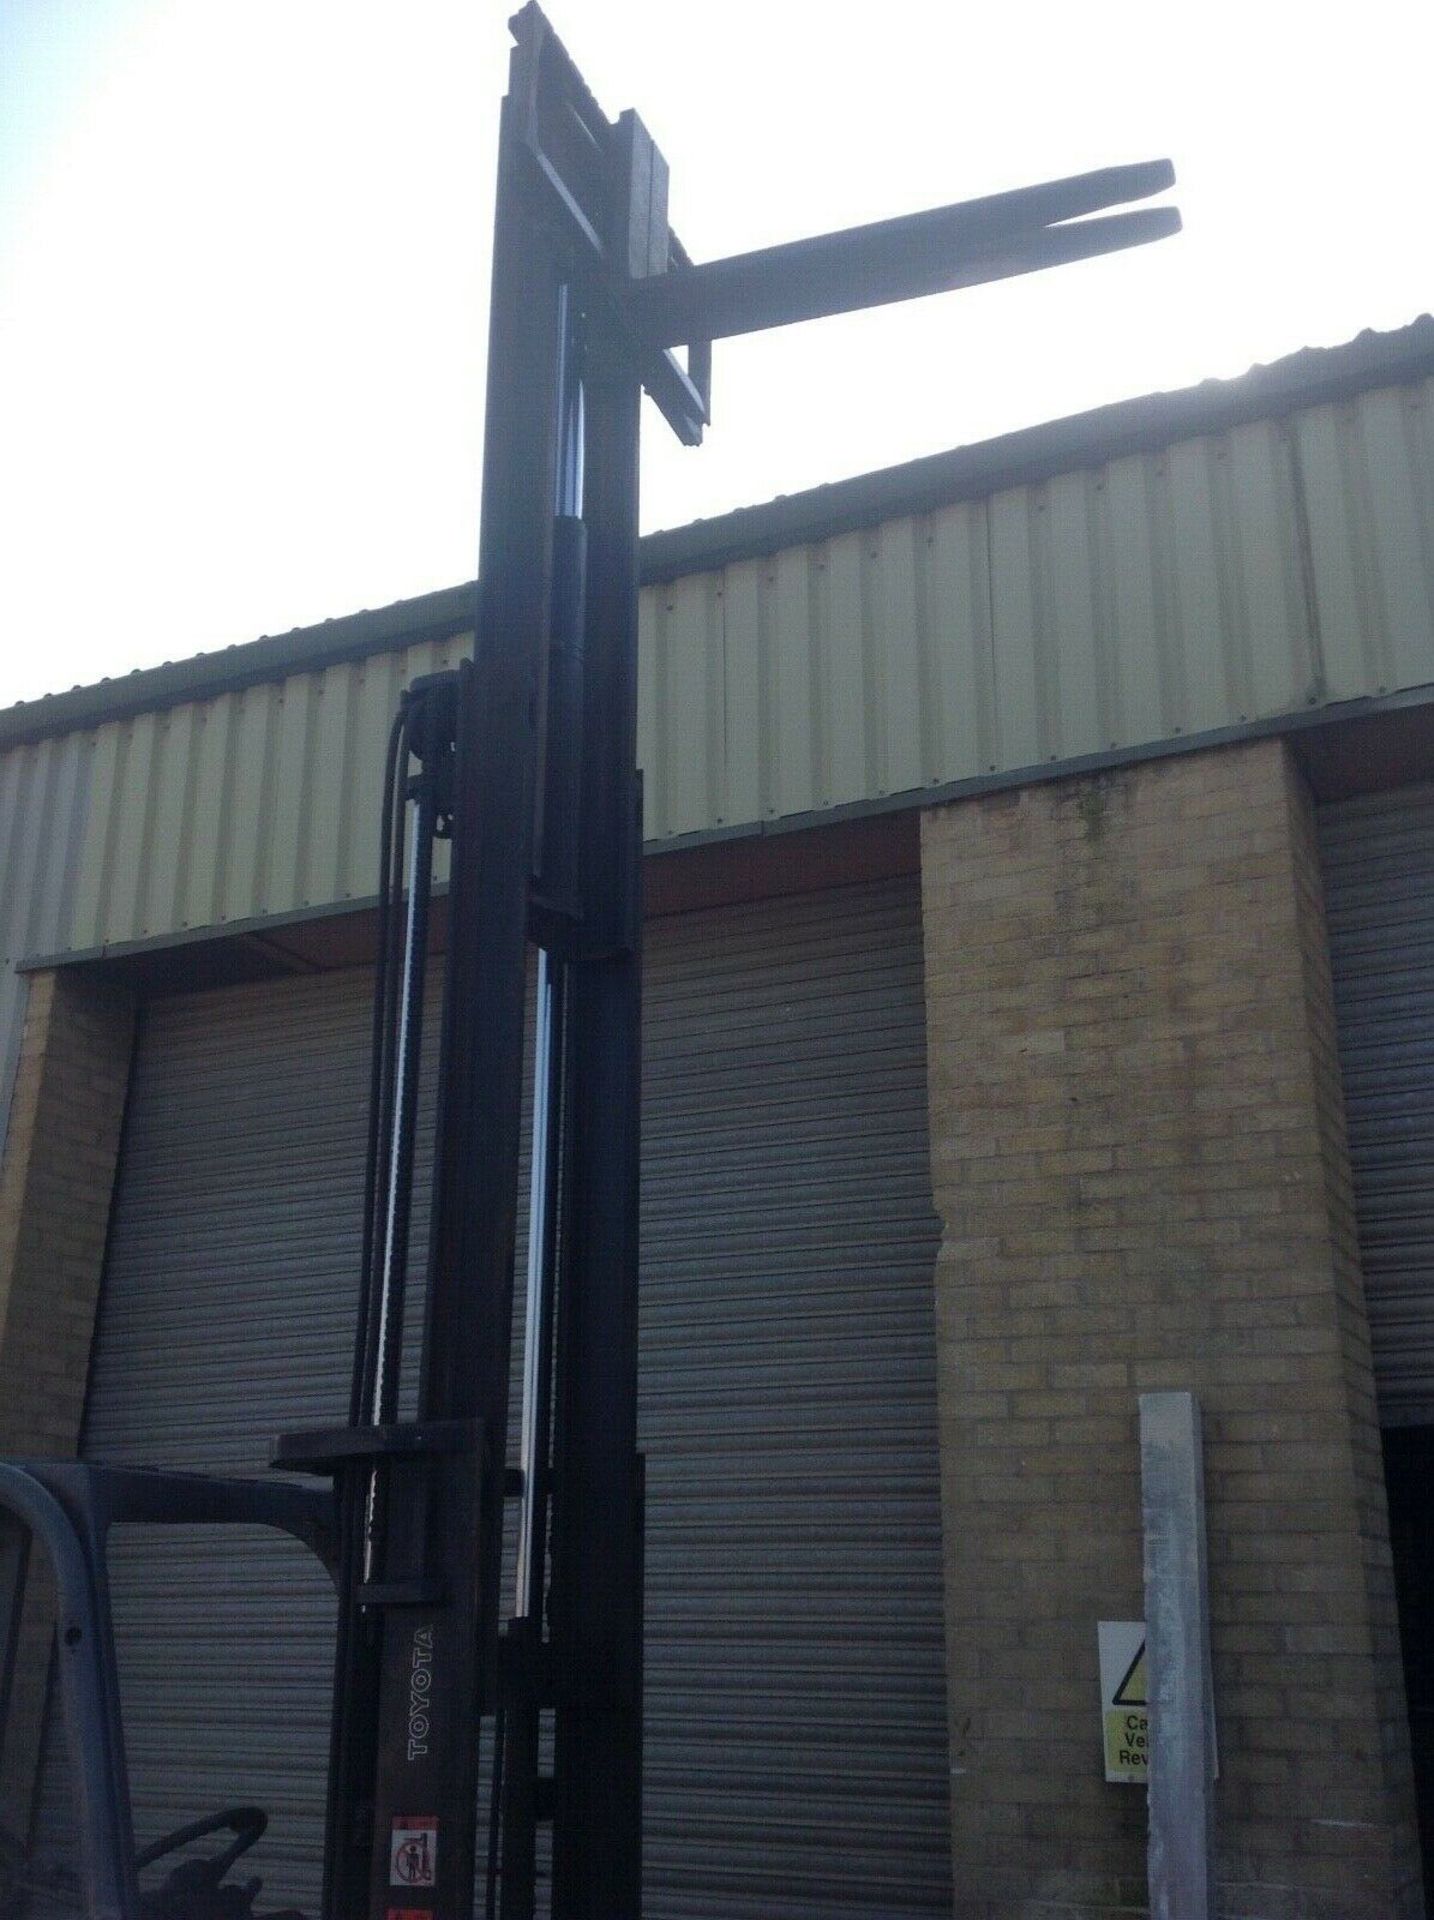 Toyota 2.5 ton gas forklift truck - Image 5 of 8